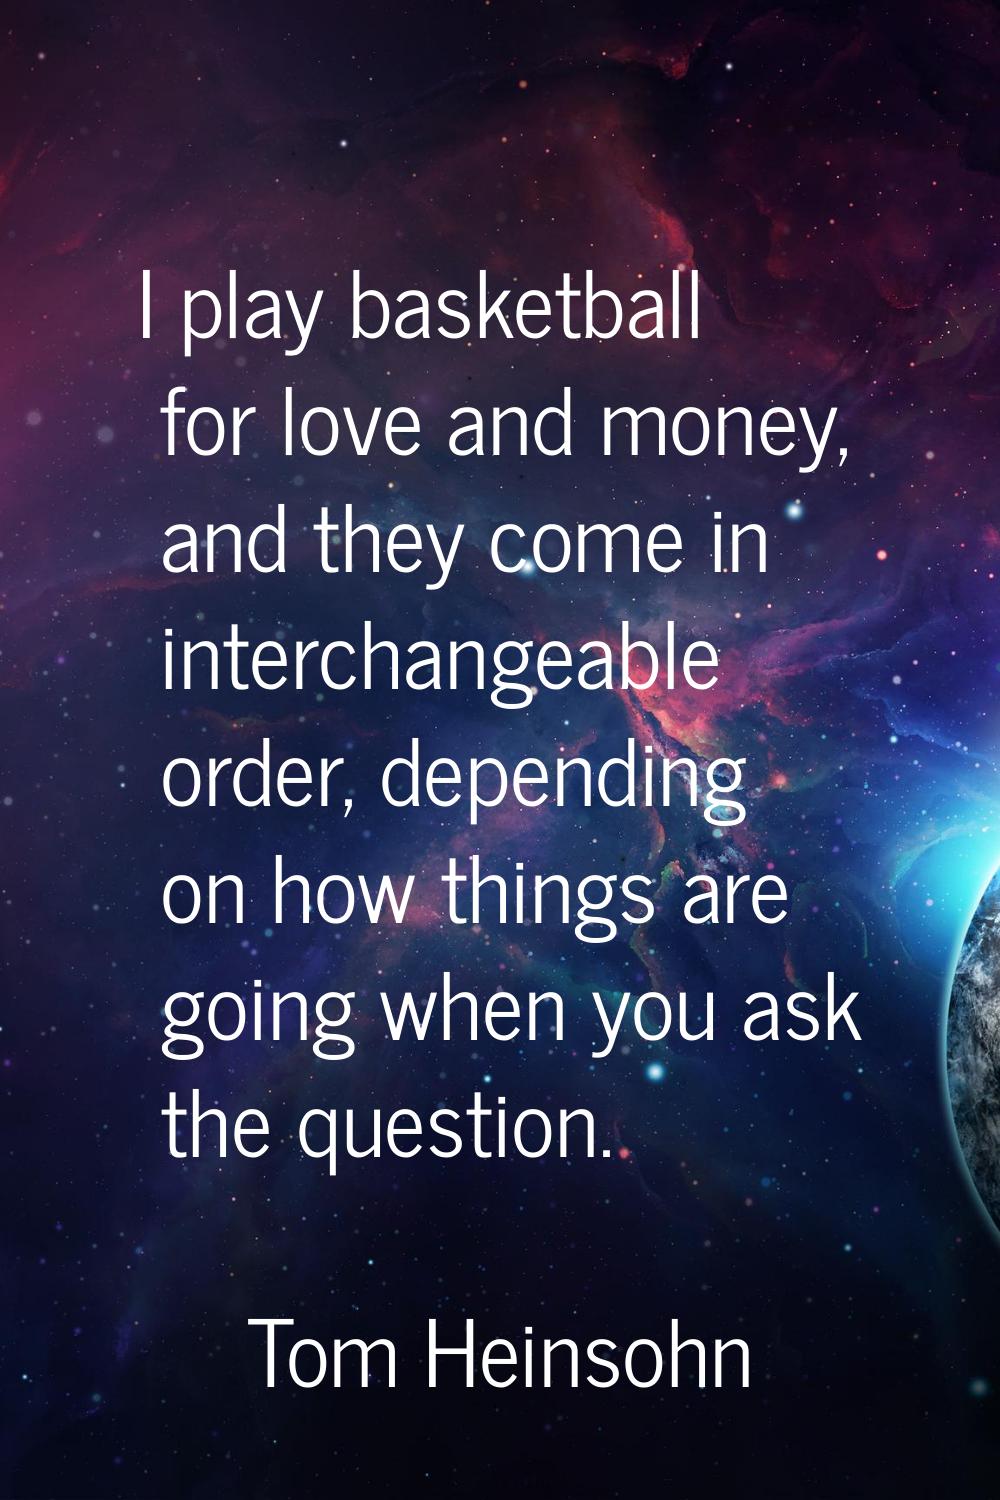 I play basketball for love and money, and they come in interchangeable order, depending on how thin